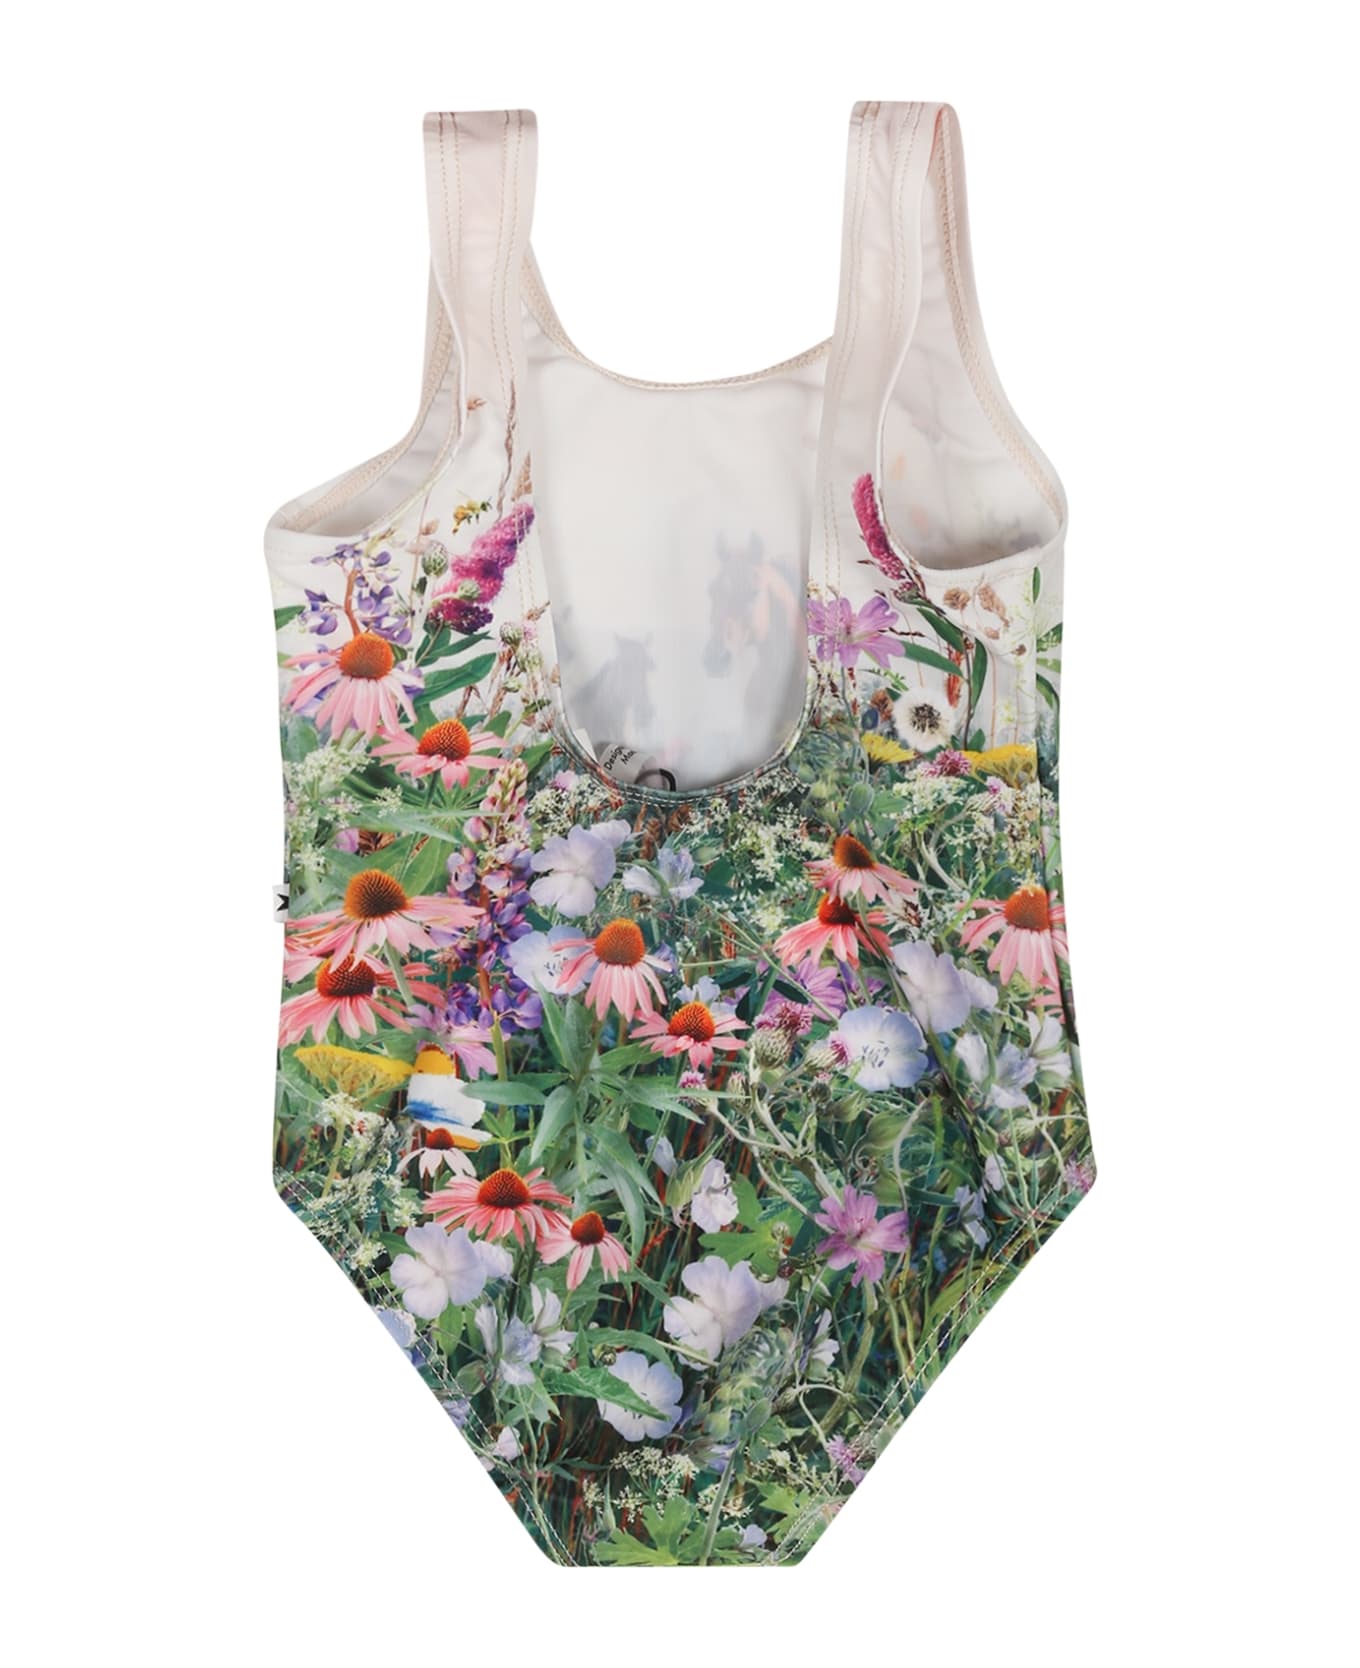 Molo Ivory Swimsuit For Baby Girl With Horses And Flowers Print - Ivory